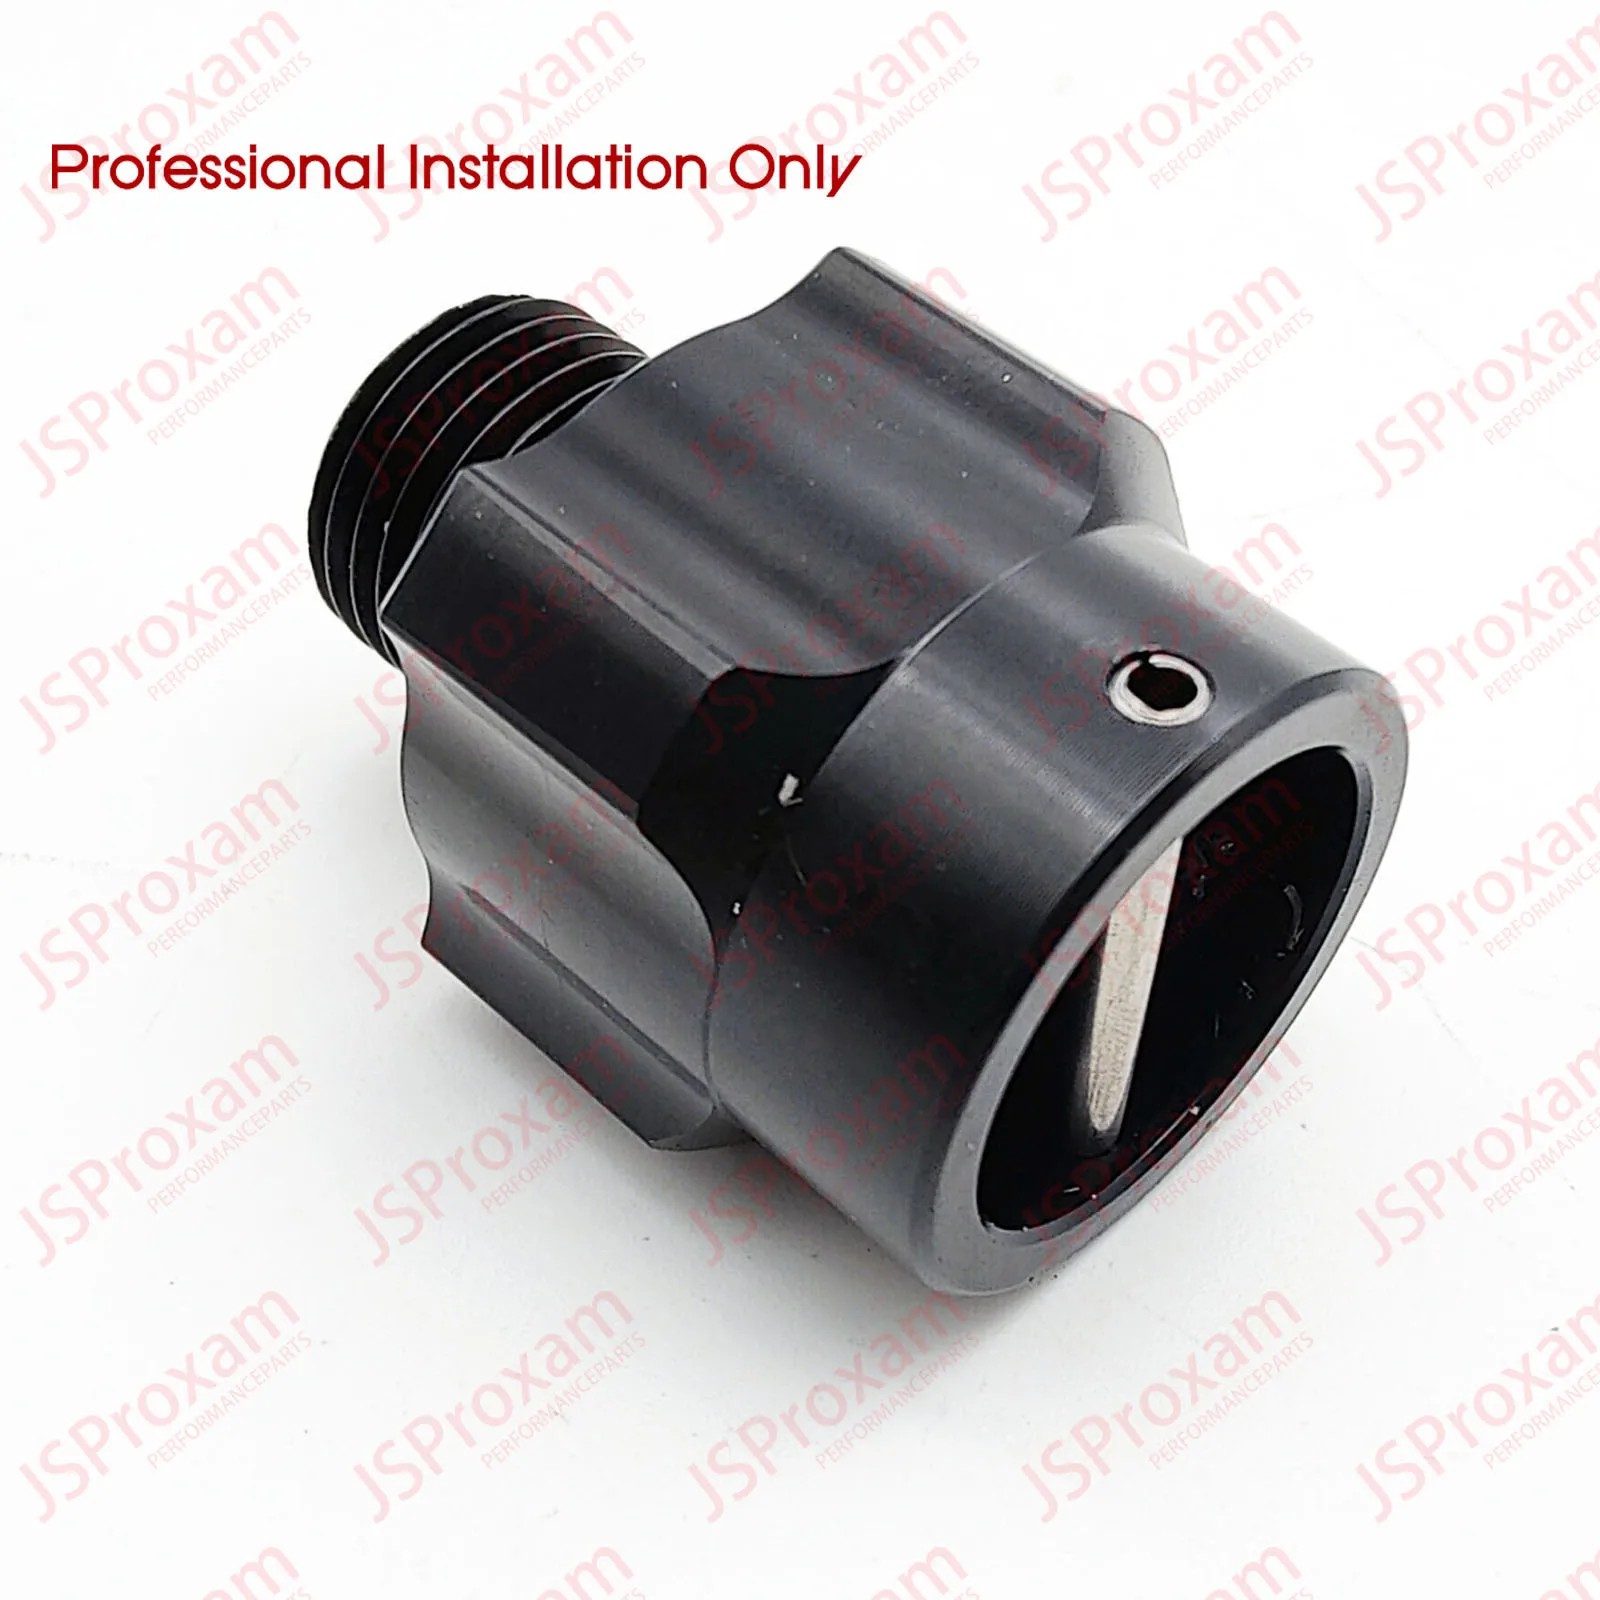 

06-01-066 Replaces Fits For Kawasaki 4802-0019 Vacate Valve Anodized Black Blowsion